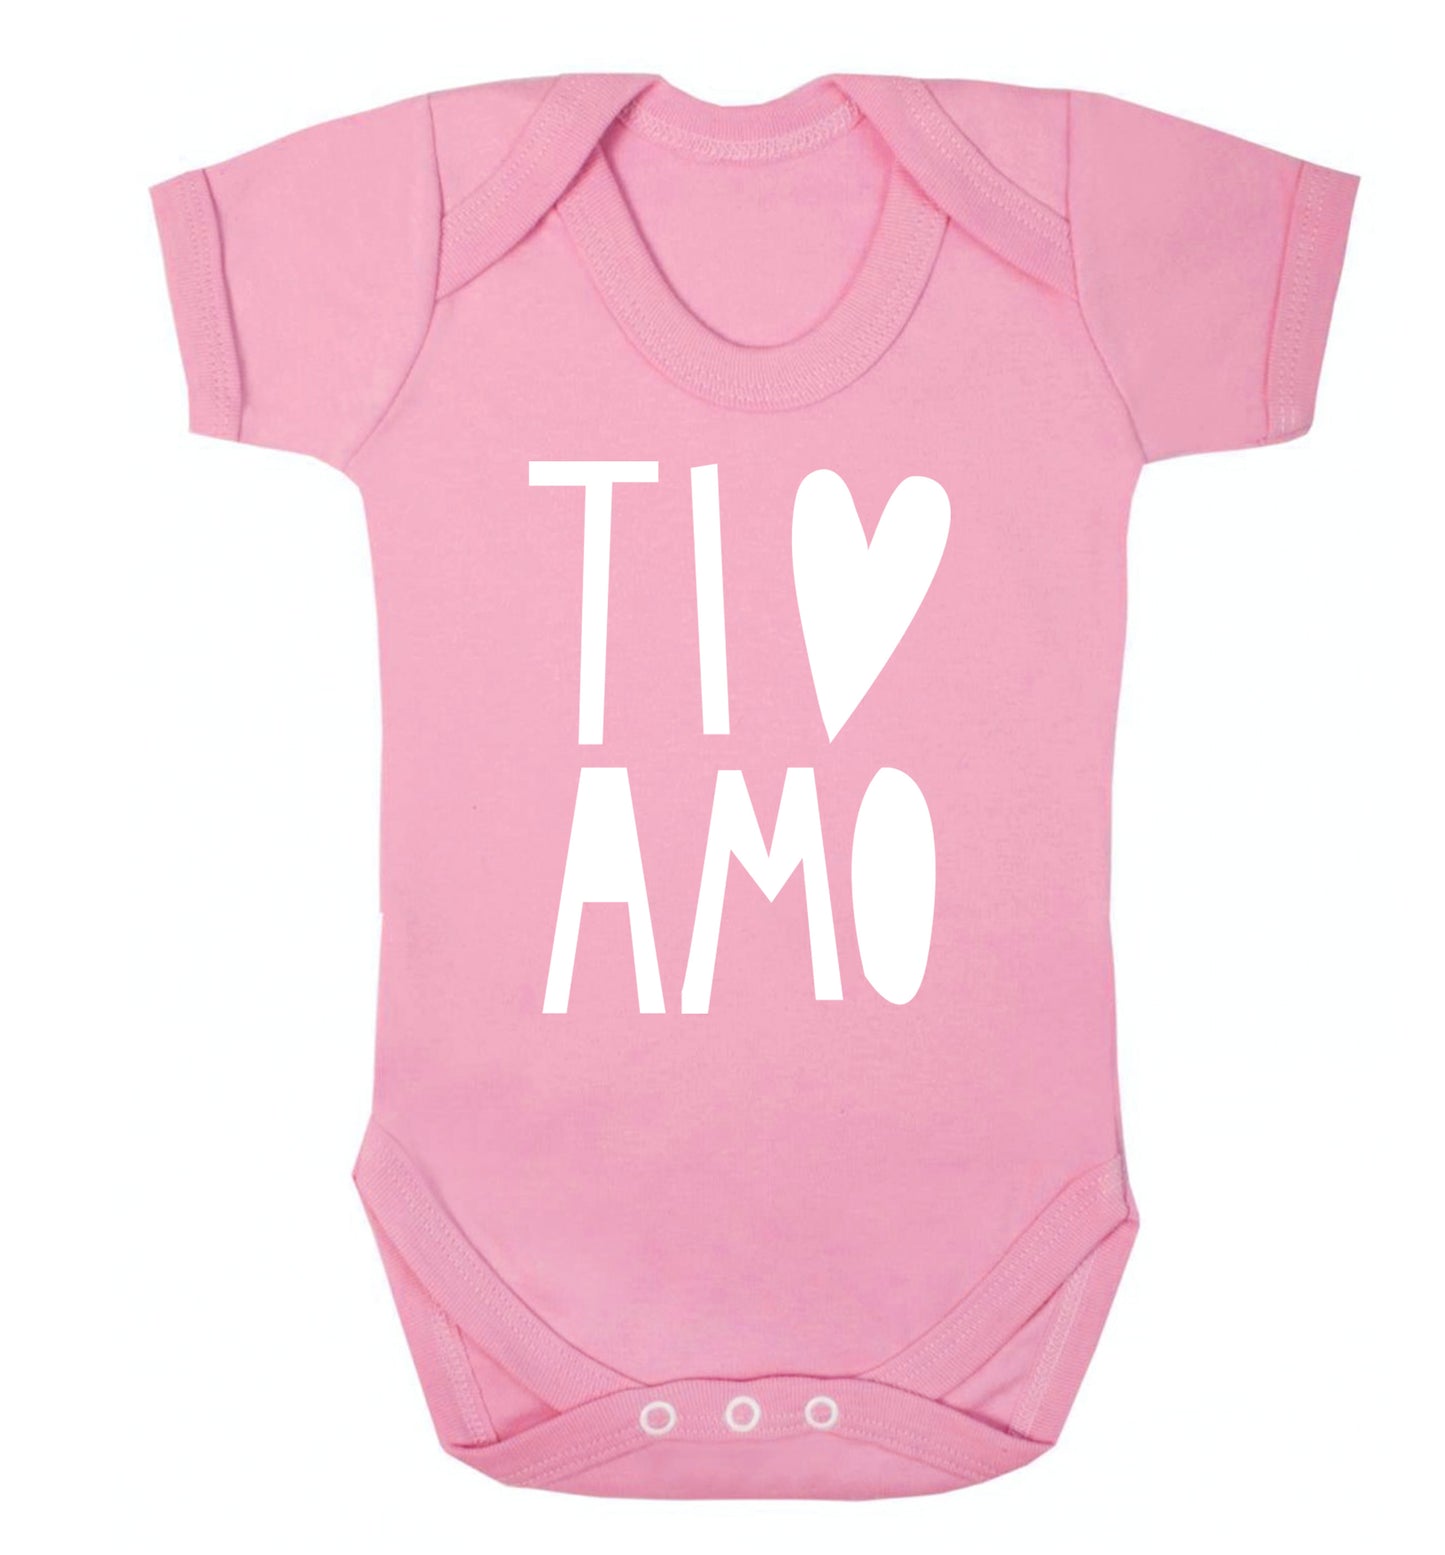 Ti amo - I love you Baby Vest pale pink 18-24 months